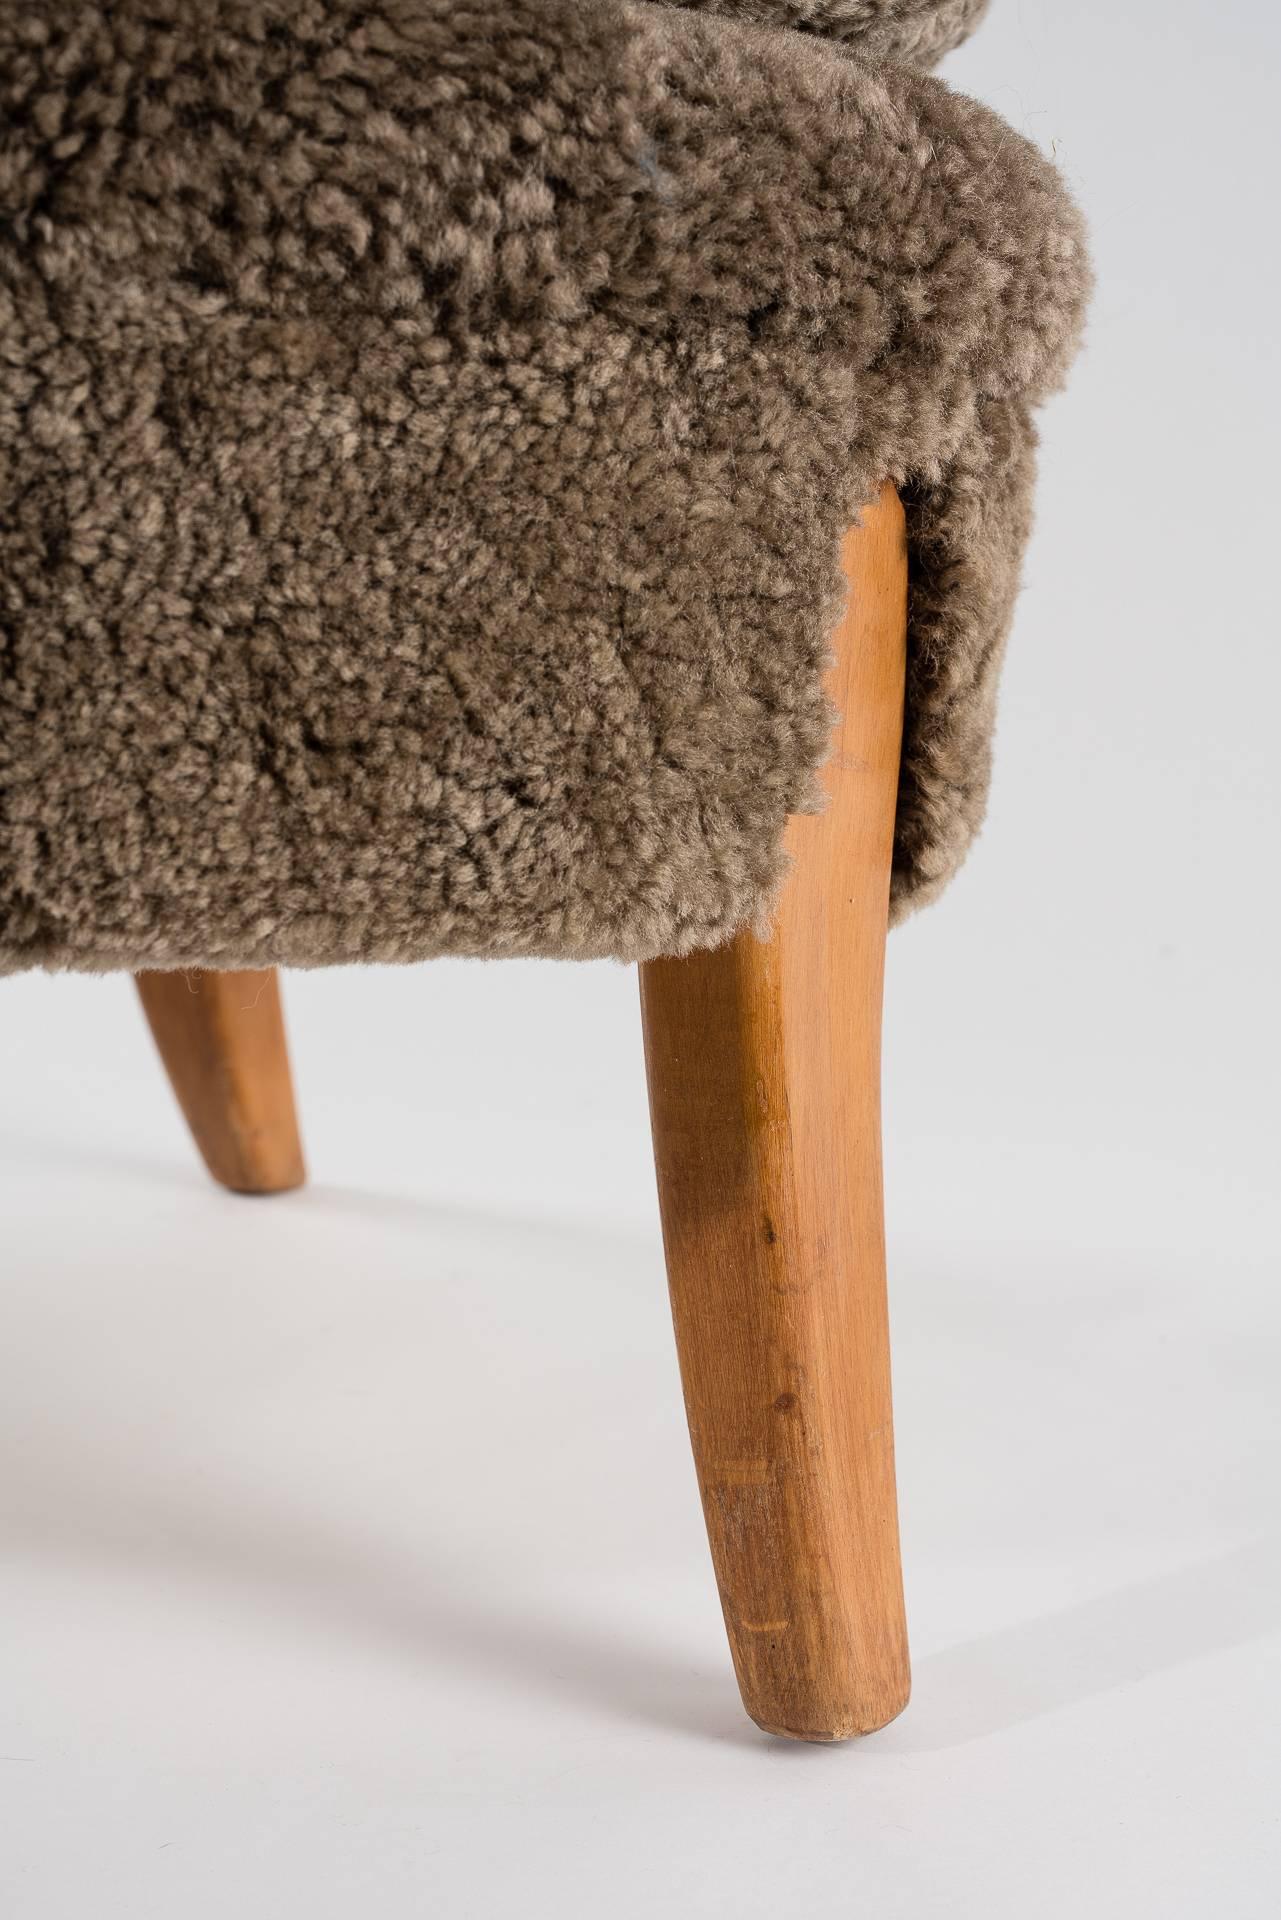 Mid-20th Century Otto Schulz Armchair, Curly Lambskin Upholstery for Boet